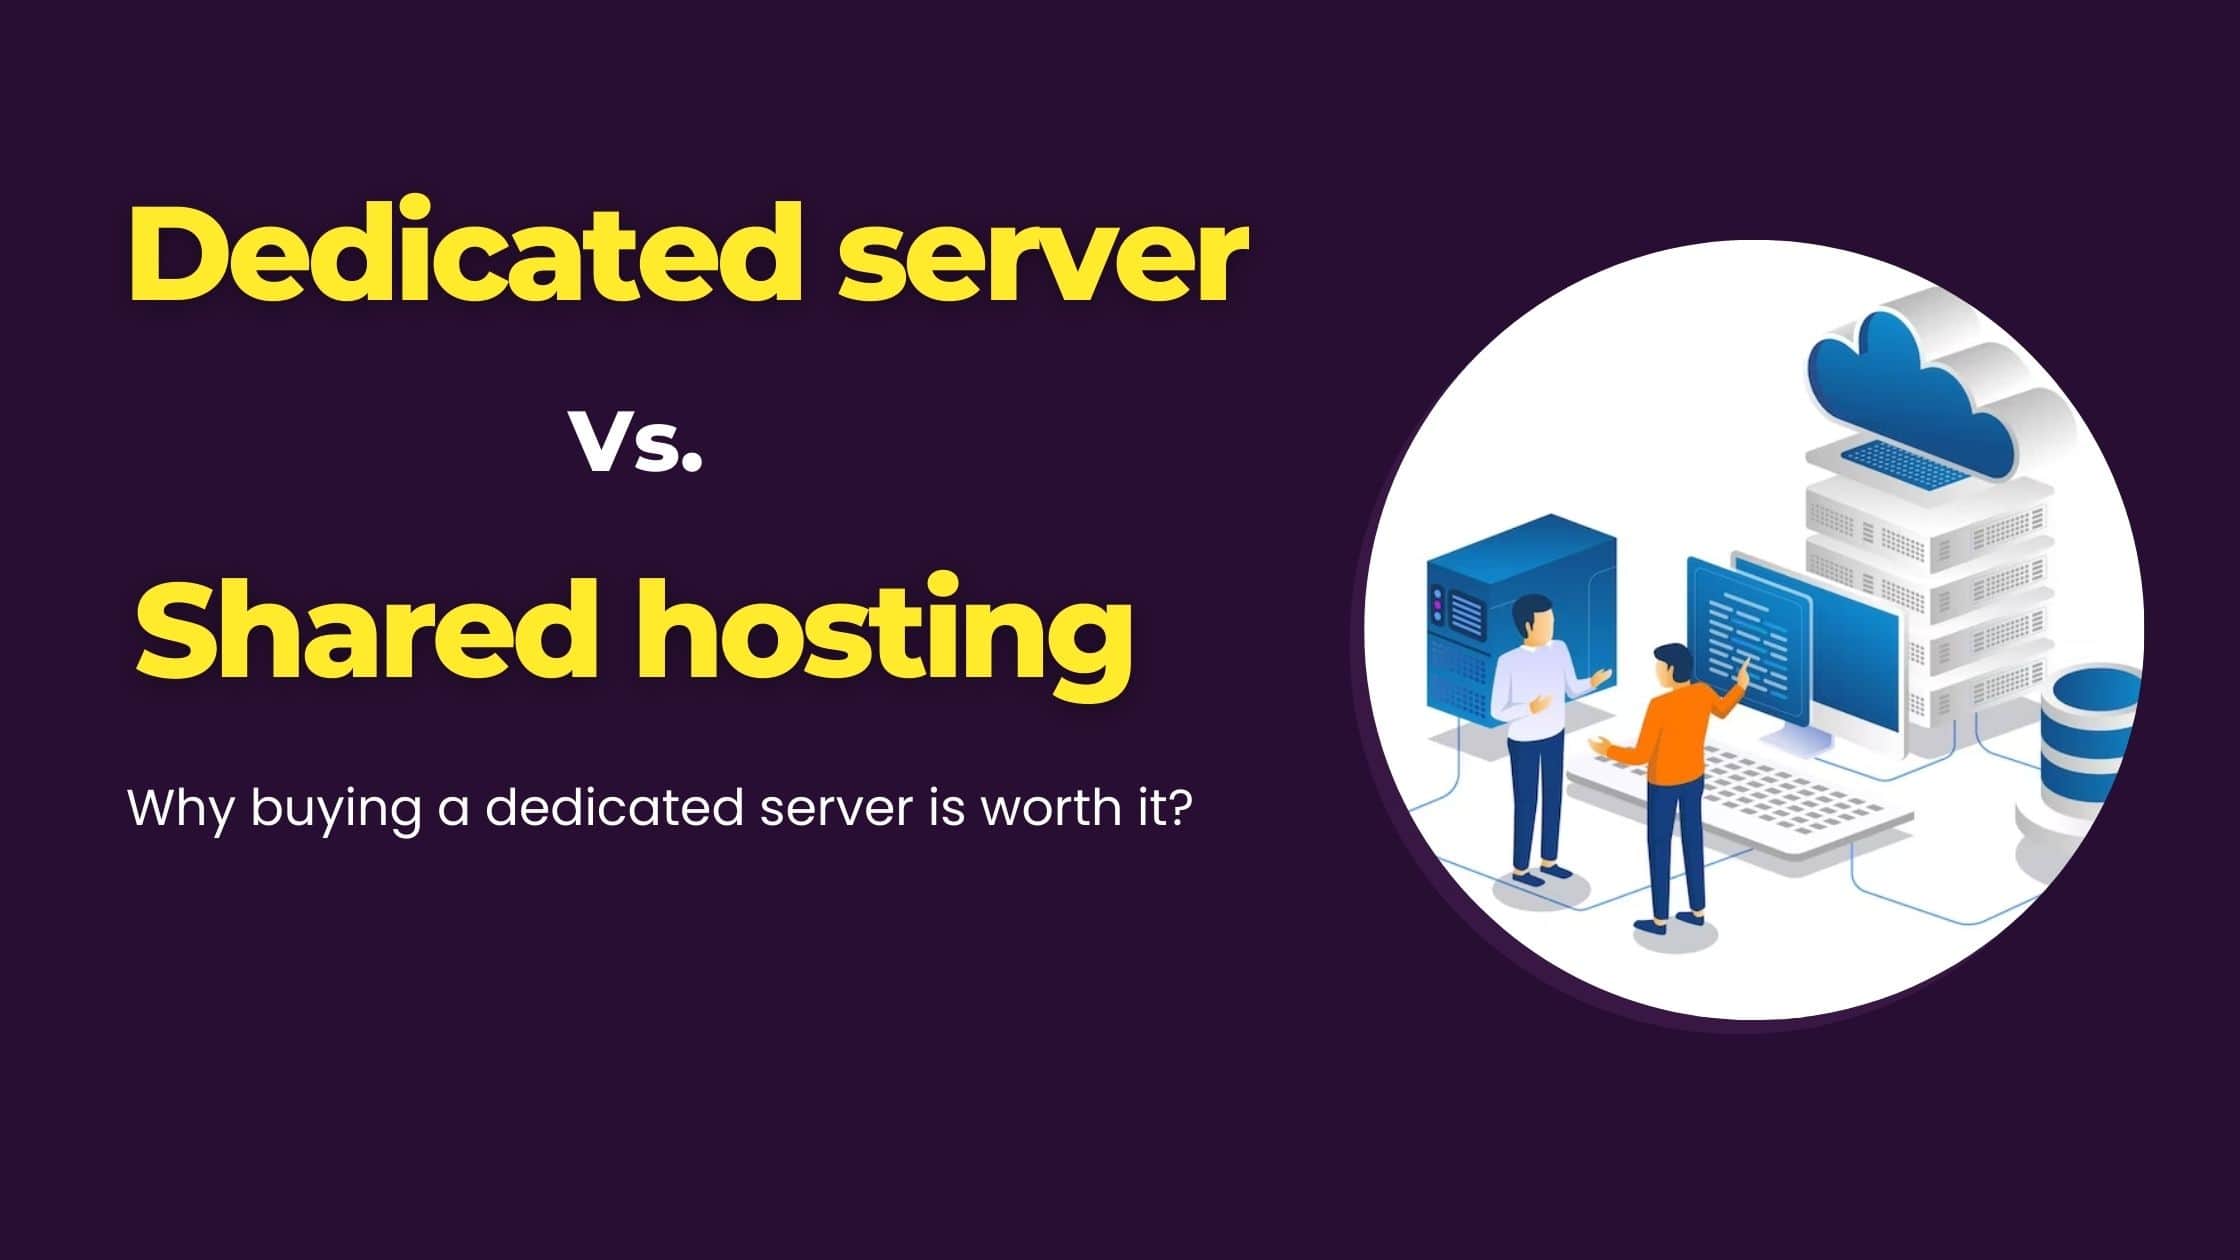 Dedicated server vs. Shared hosting: Why buying a dedicated server is worth it?